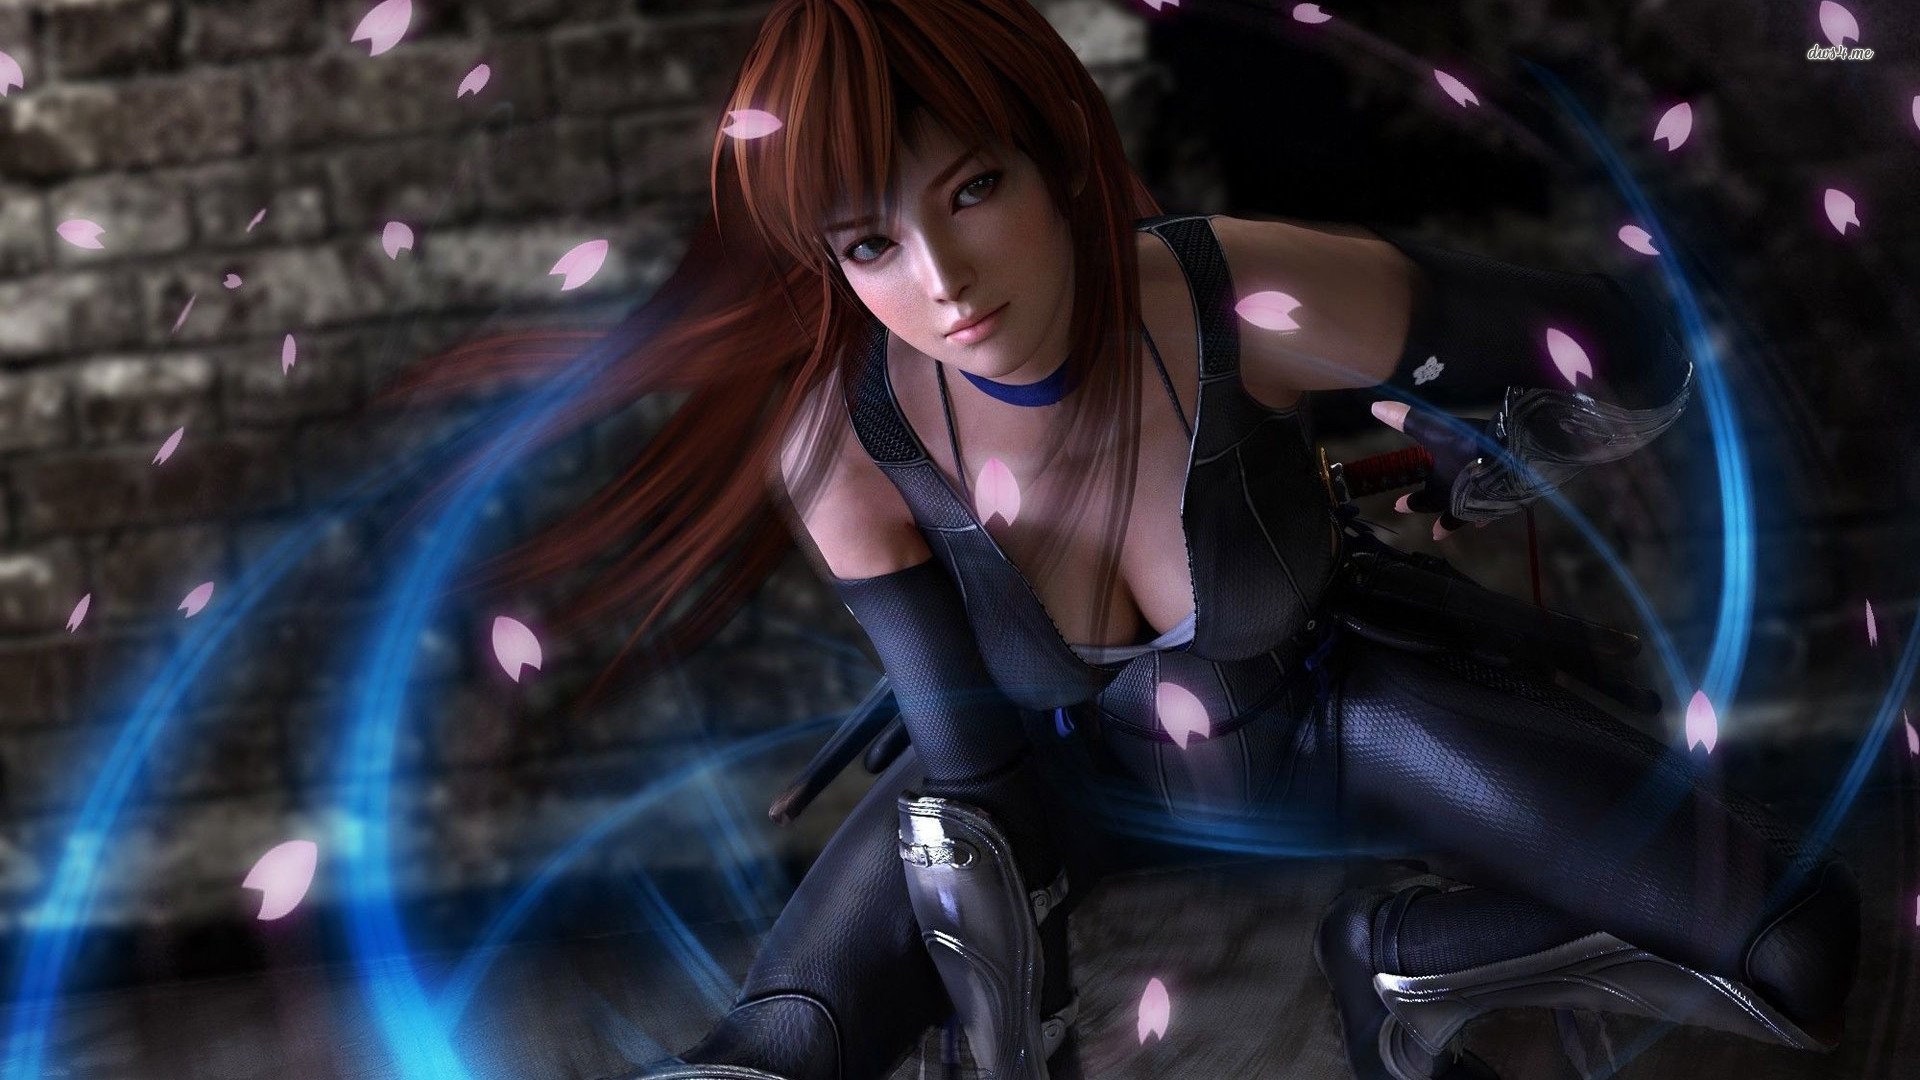 HD Wallpaper Background ID562357. Video Game Dead Or Alive 5